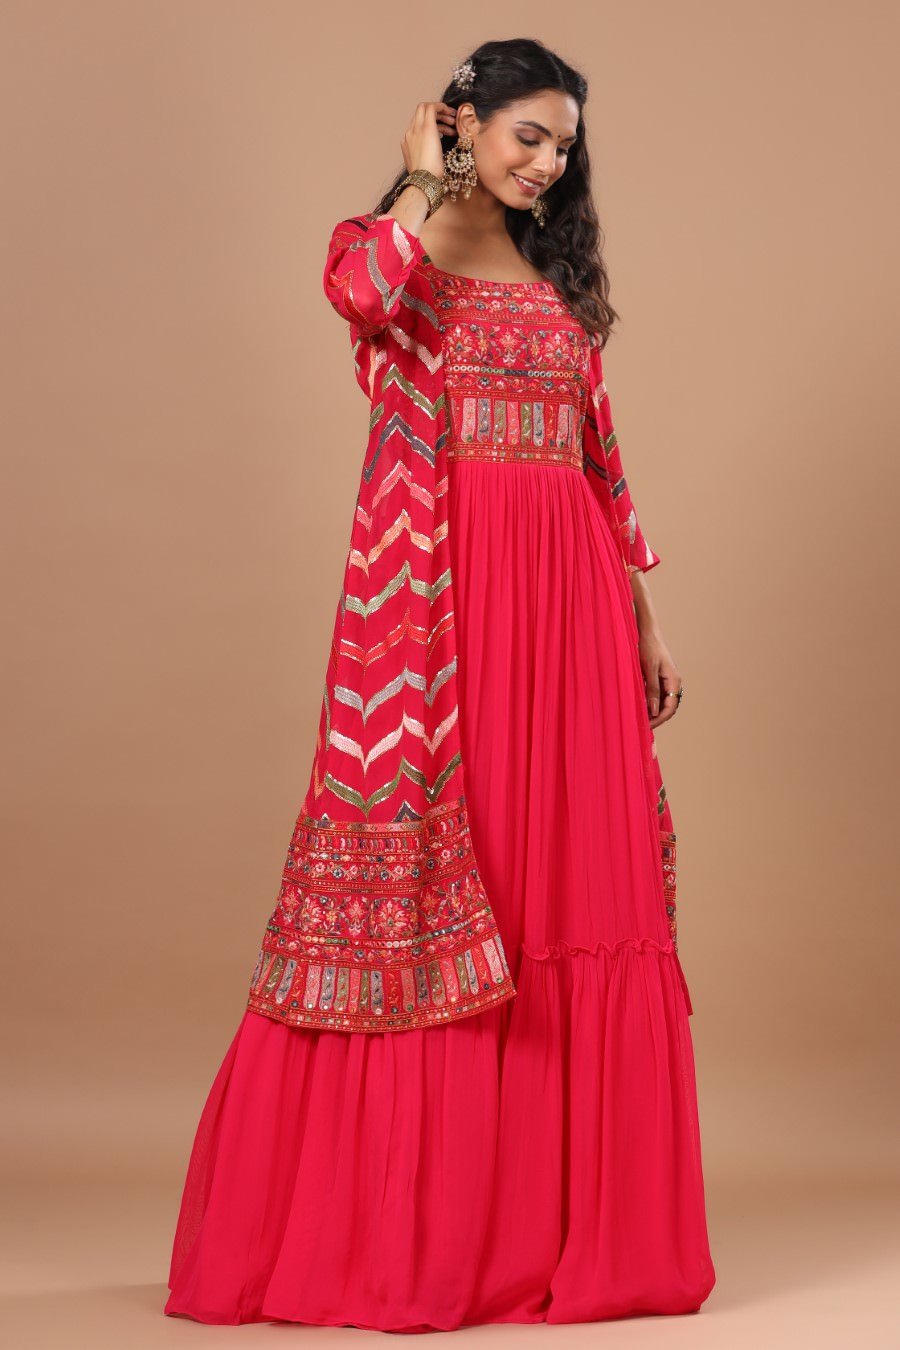 Rani Pink Georgette Anarkali Gown with Heavy Embroidery - Urban Womania